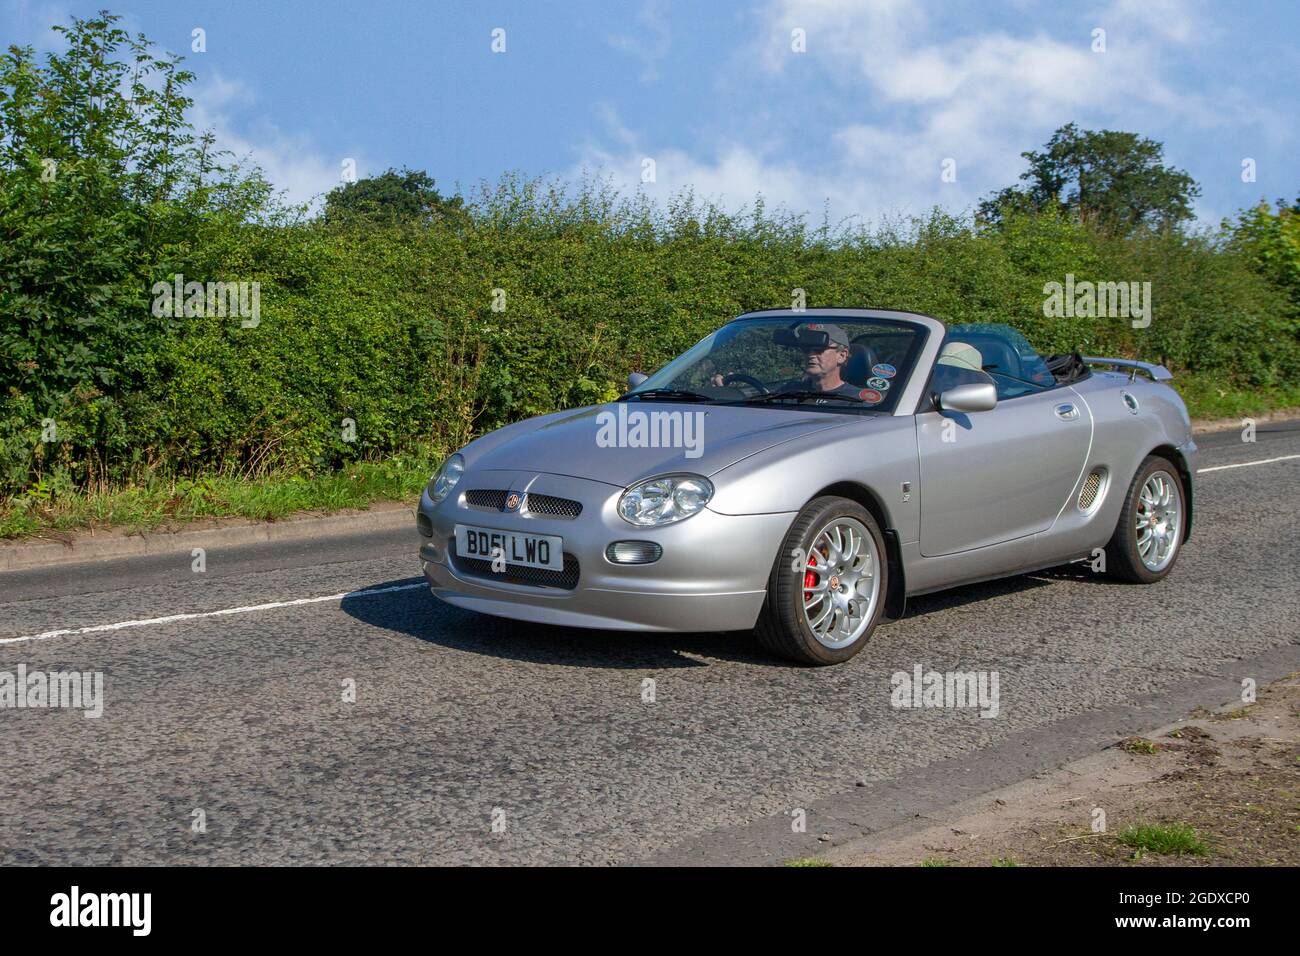 2001 silver MG MGF 5 speed manual 1796cc petrol cabriolet en-route to Capesthorne Hall classic July car show, Cheshire, UK Stock Photo